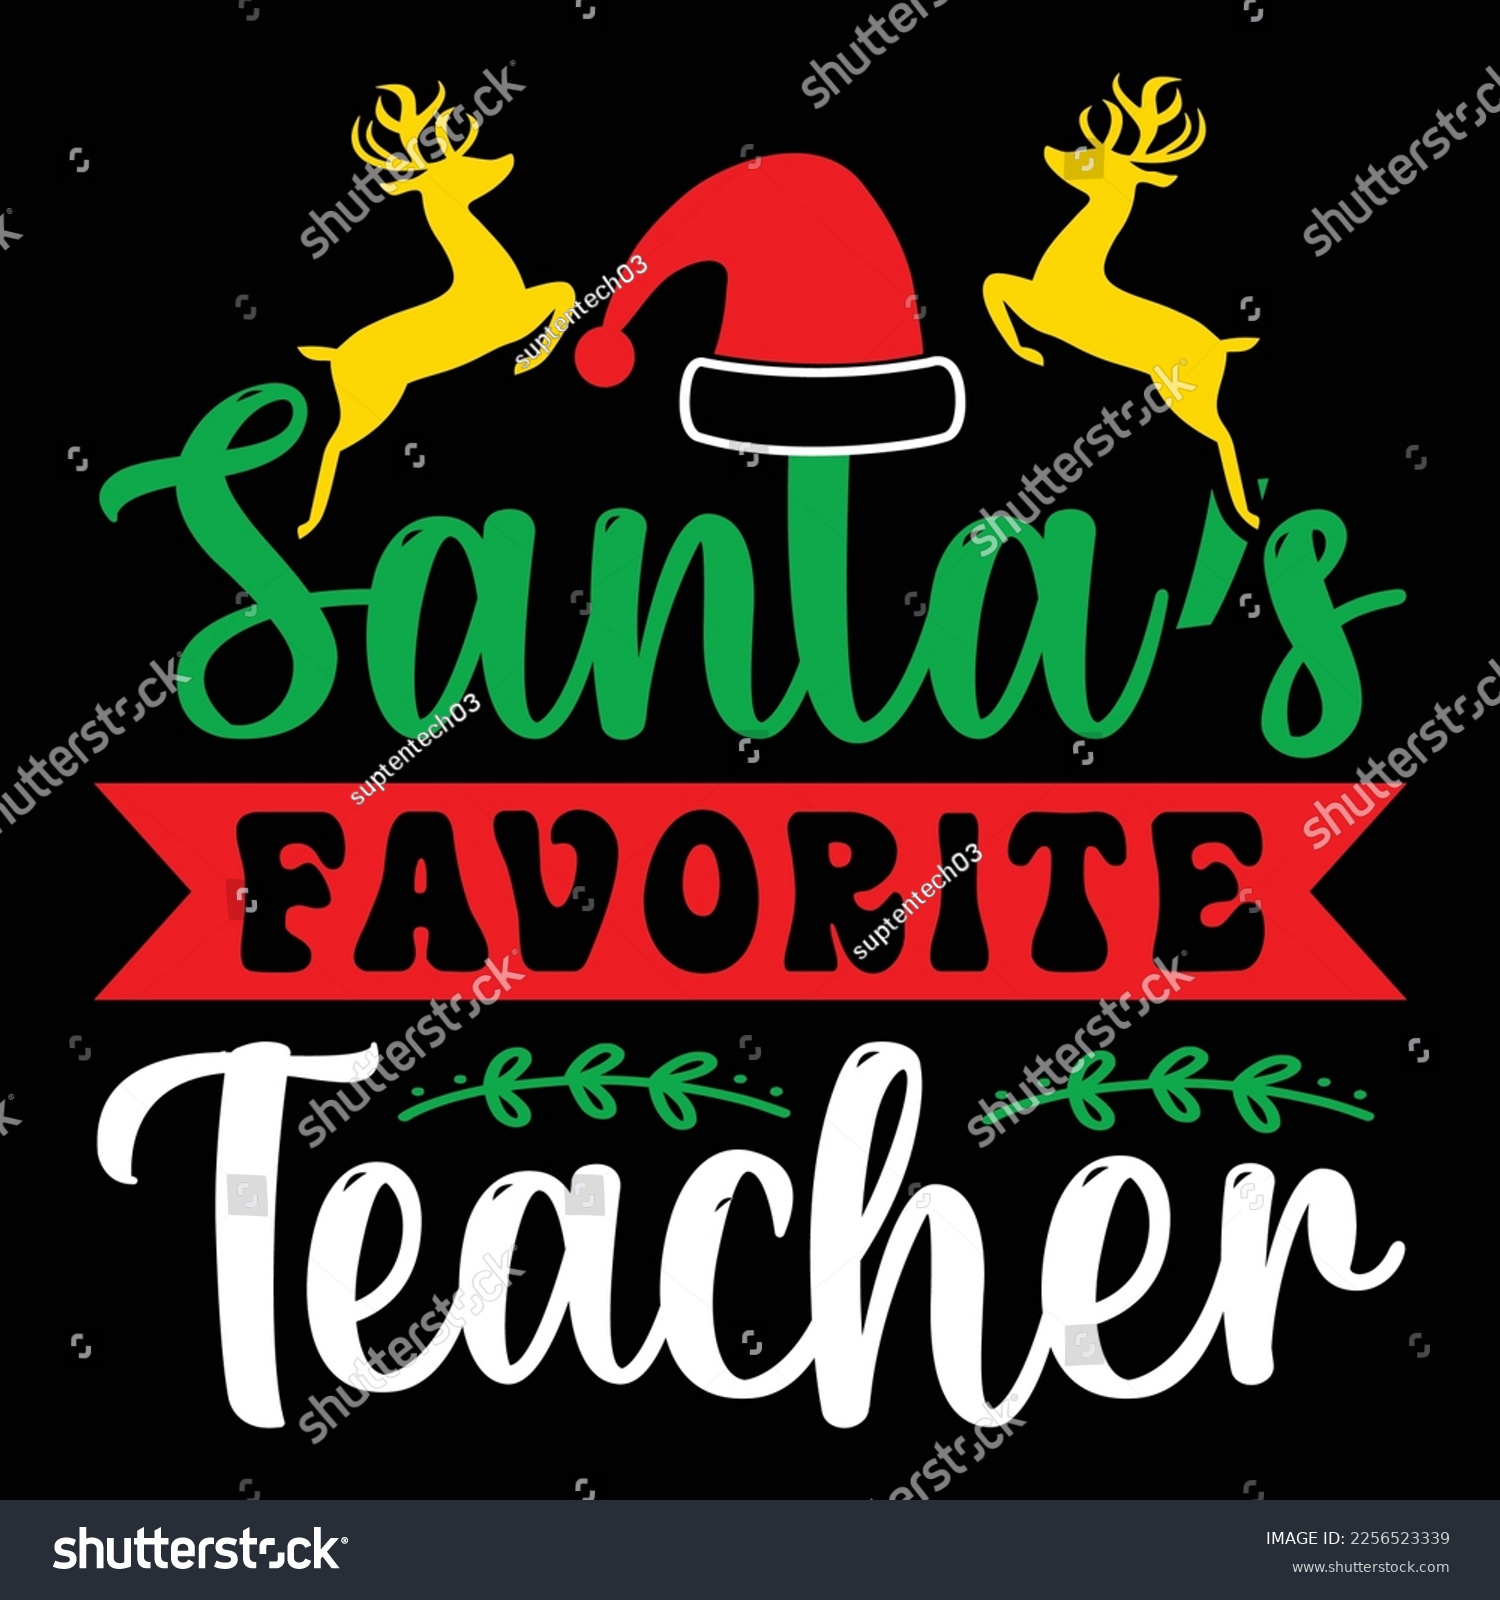 SVG of Santa's Favorite Teacher, Merry Christmas shirts Print Template, Xmas Ugly Snow Santa Clouse New Year Holiday Candy Santa Hat vector illustration for Christmas hand lettered svg